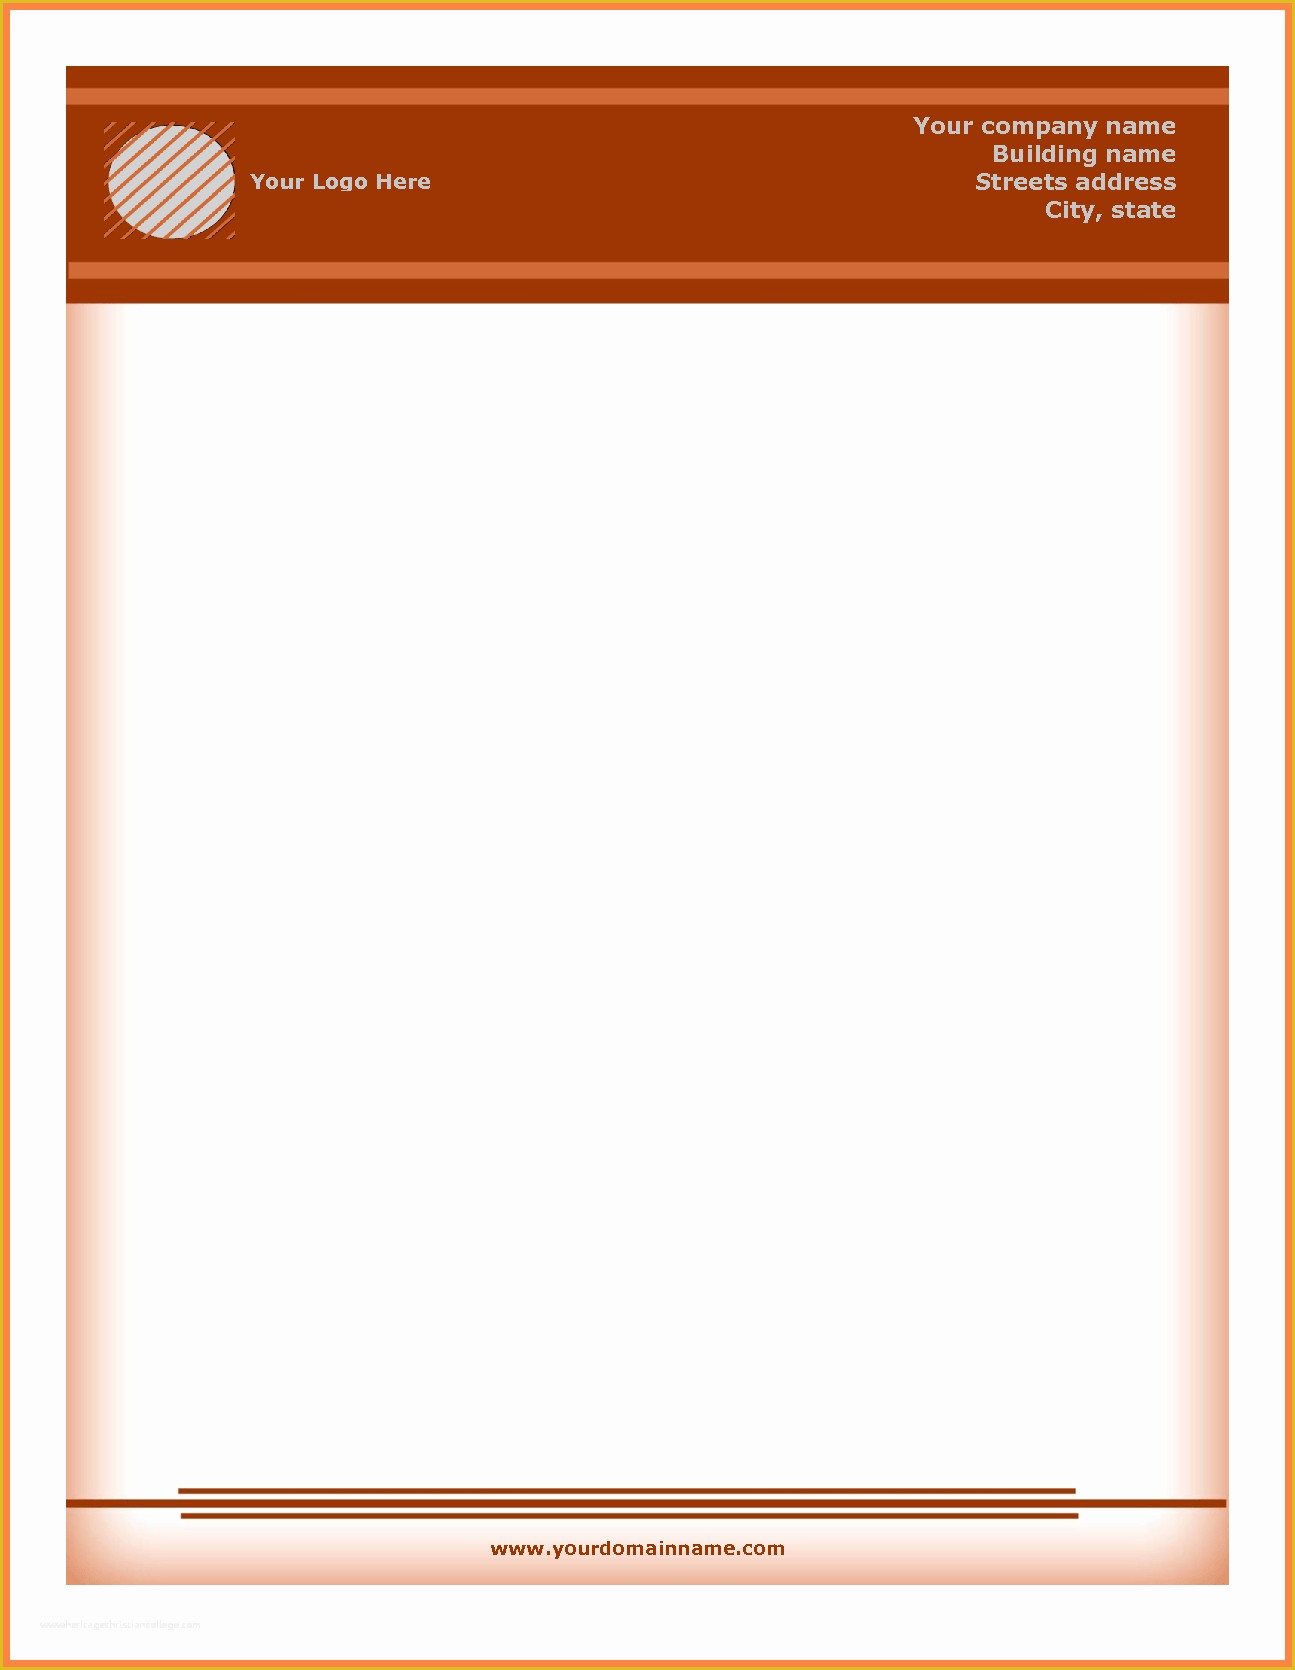 Personal Letterhead Templates Free Download Of 5 Letterhead Templates